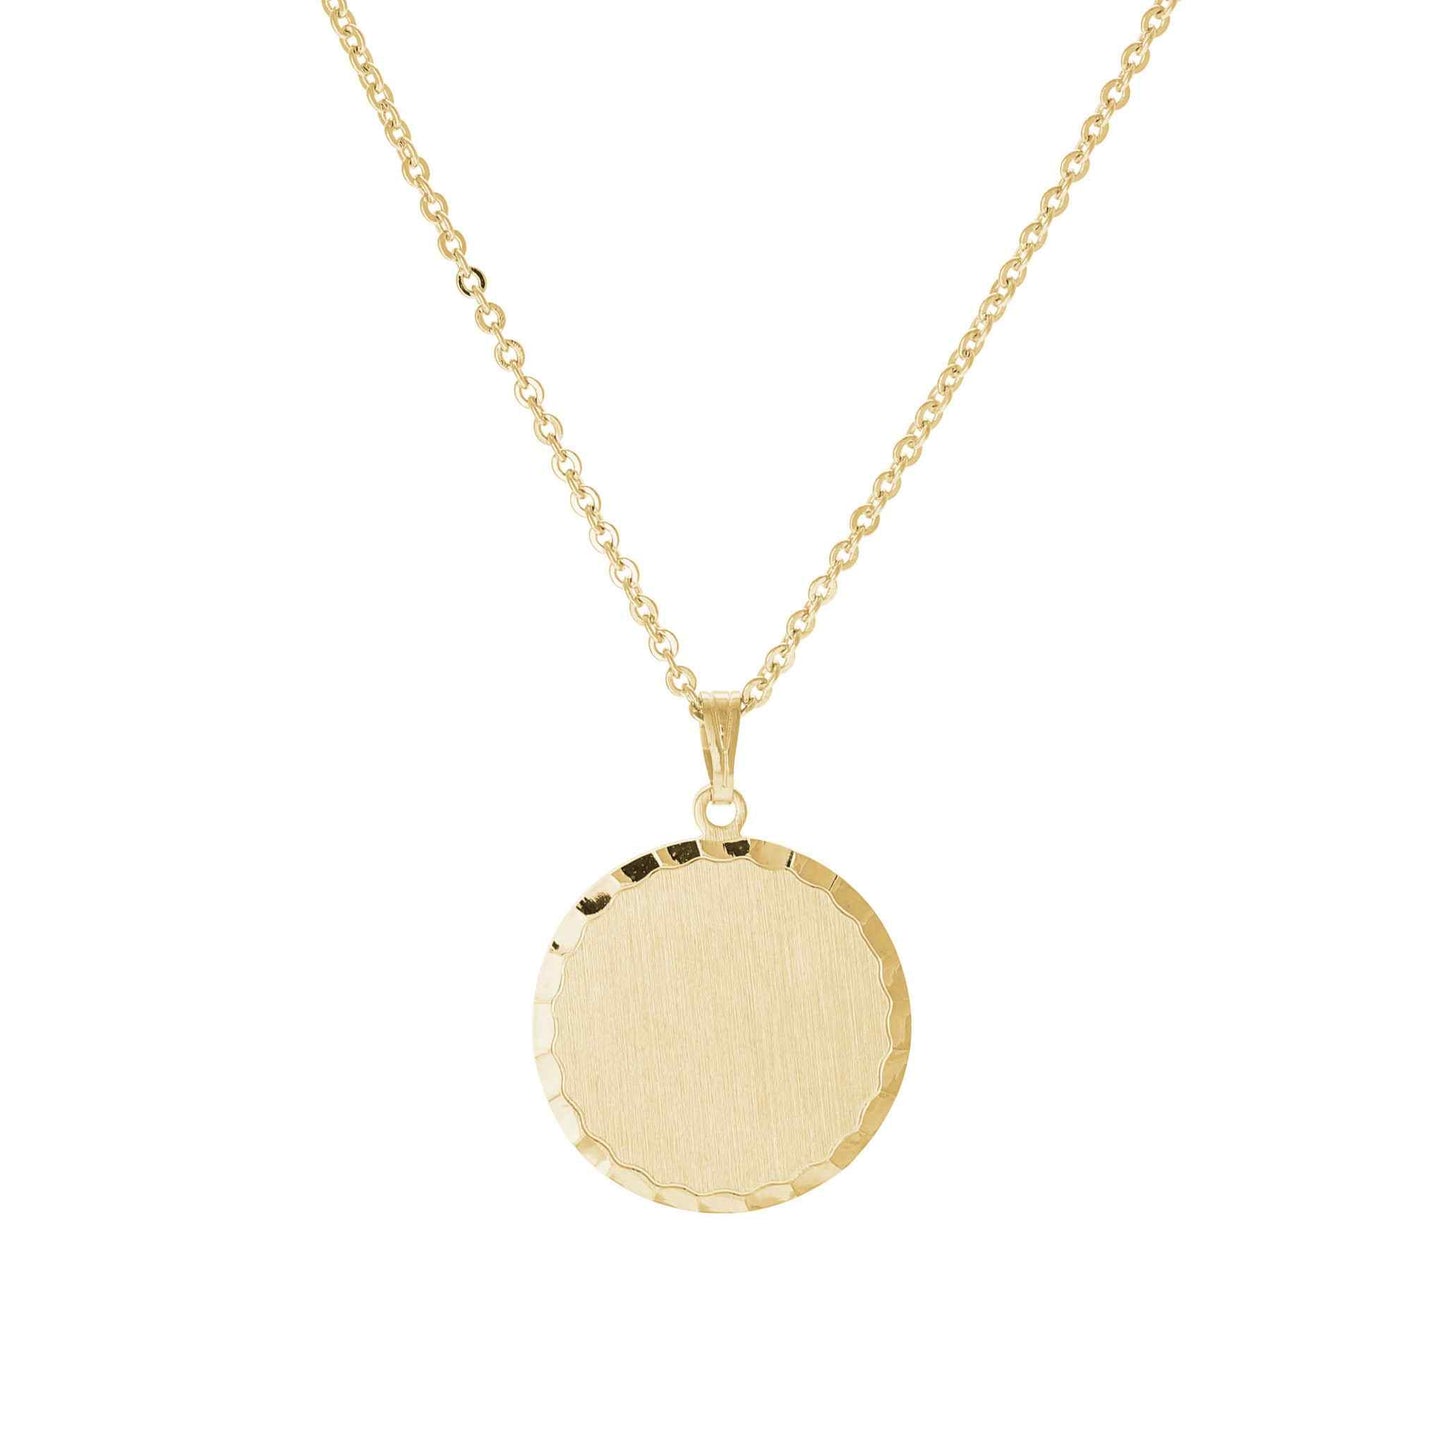 A florentine finish necklace with edge details displayed on a neutral white background.